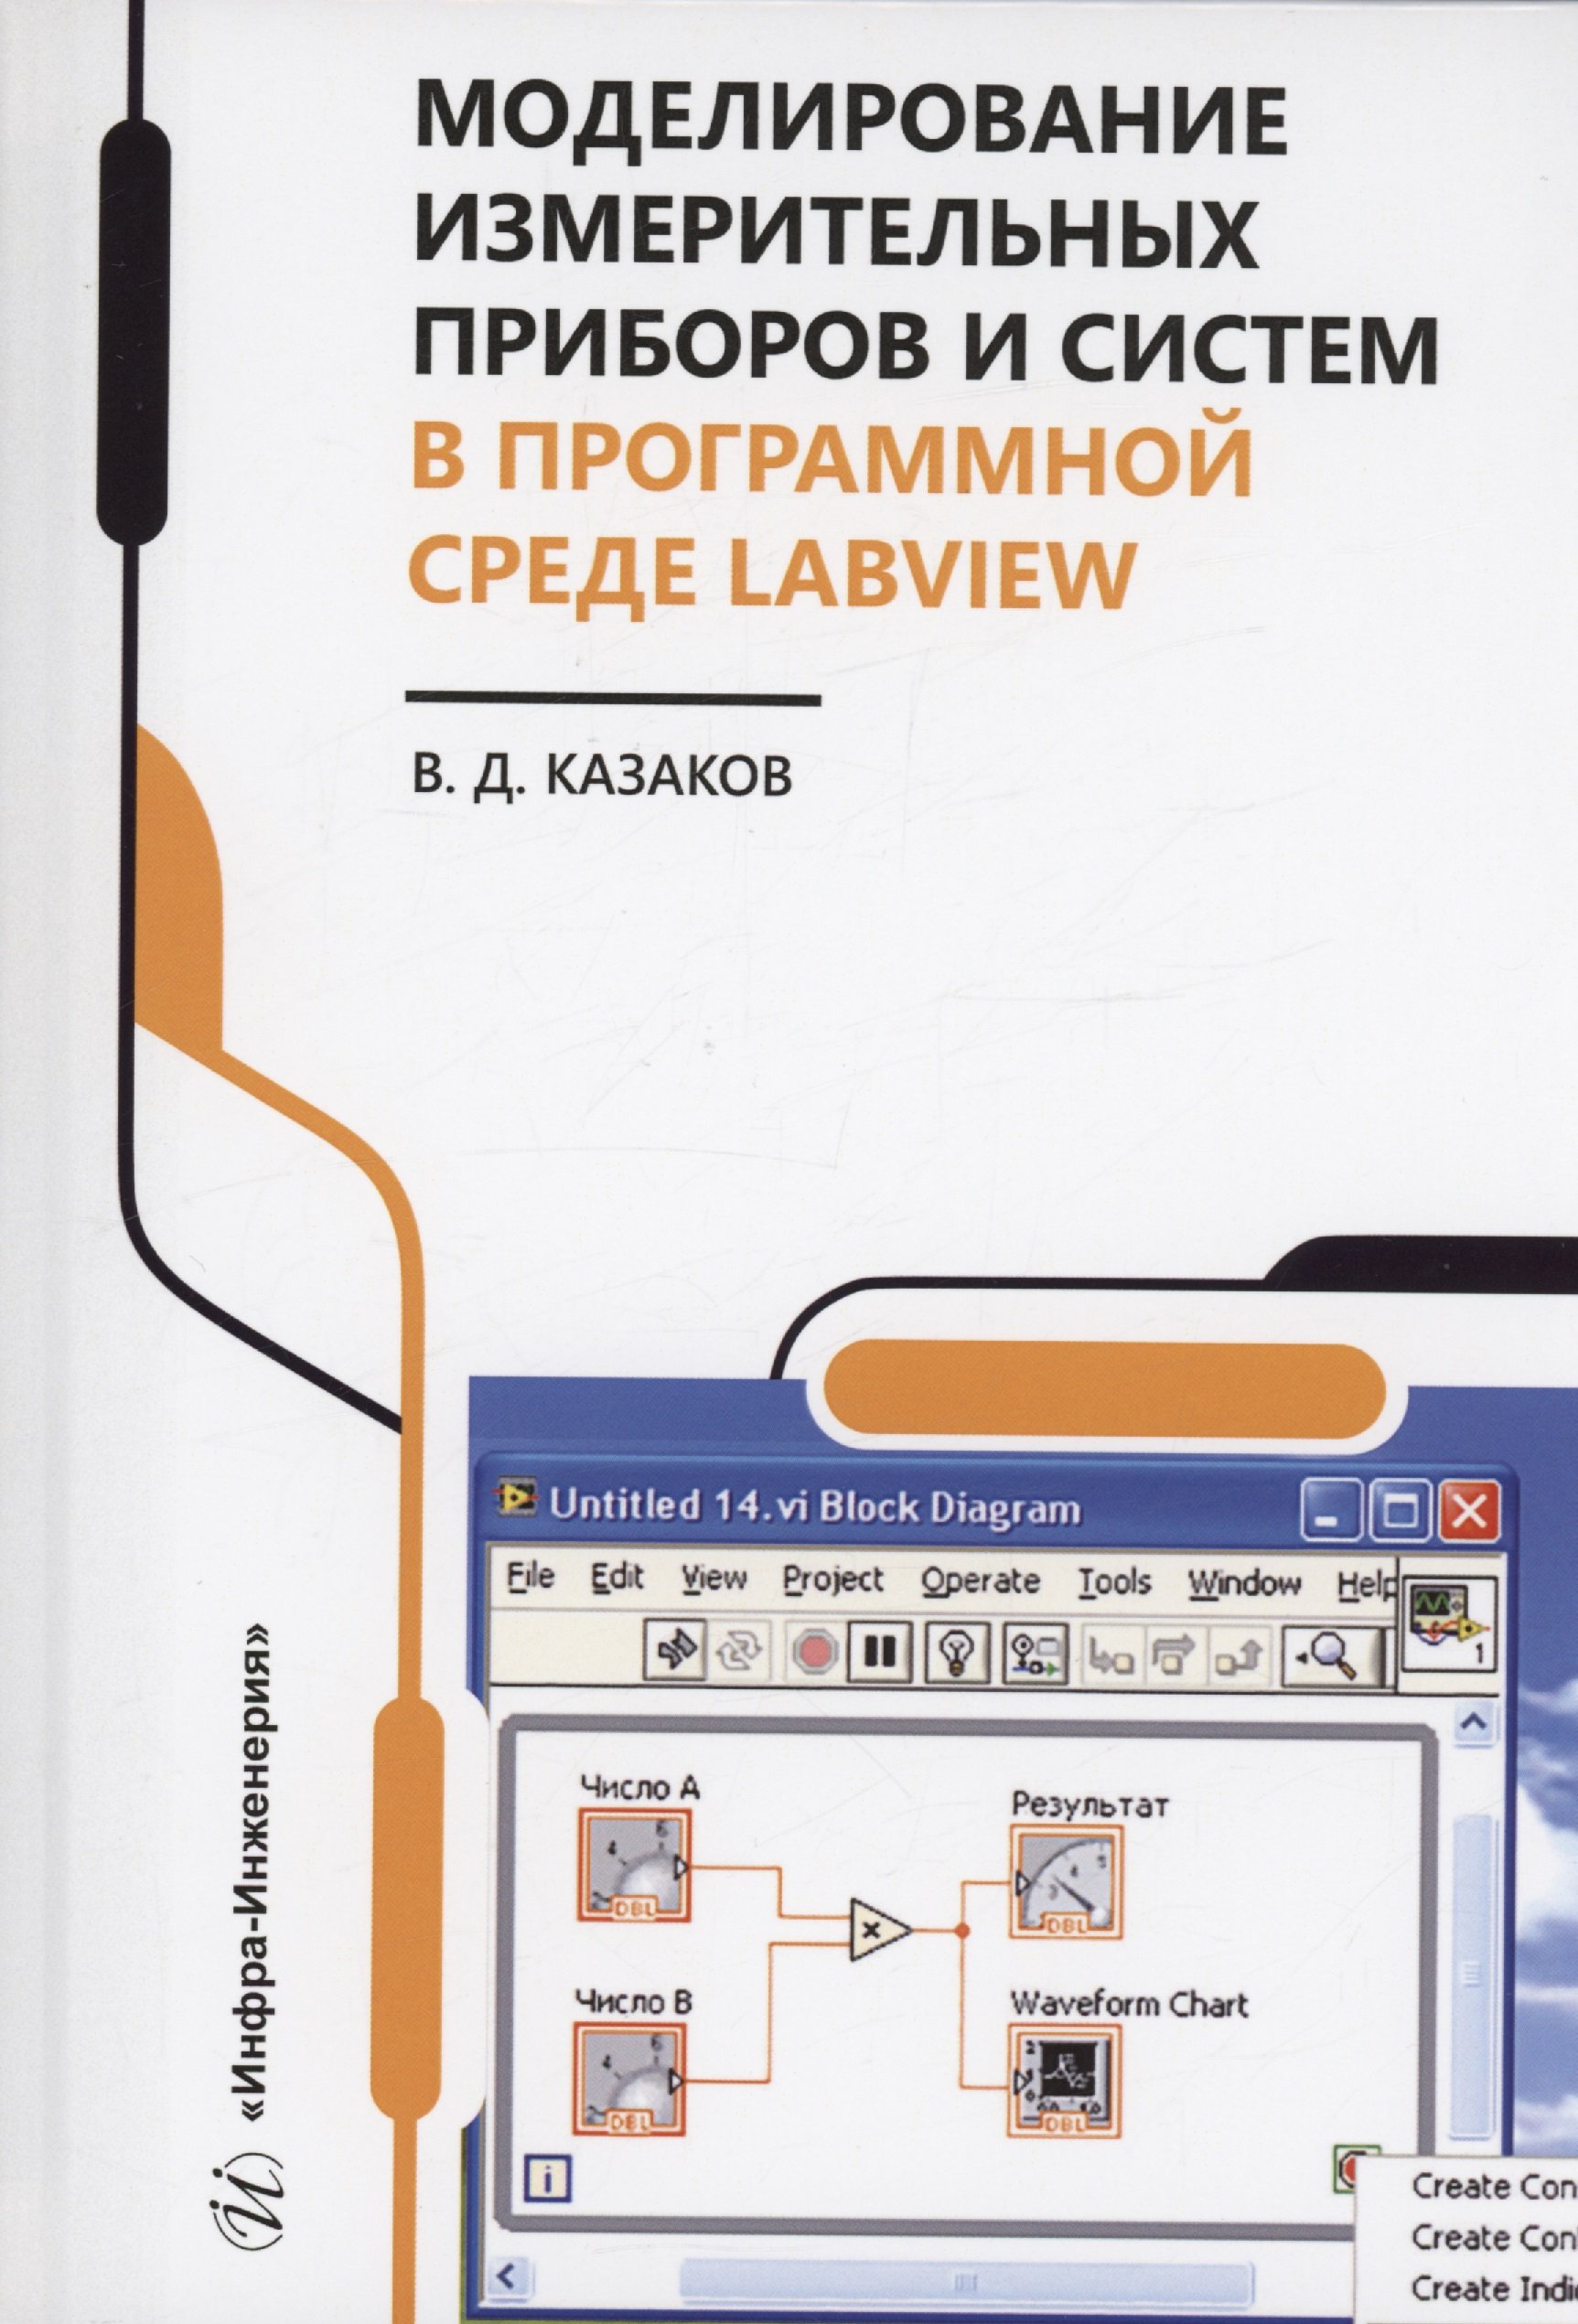         LabVIEW